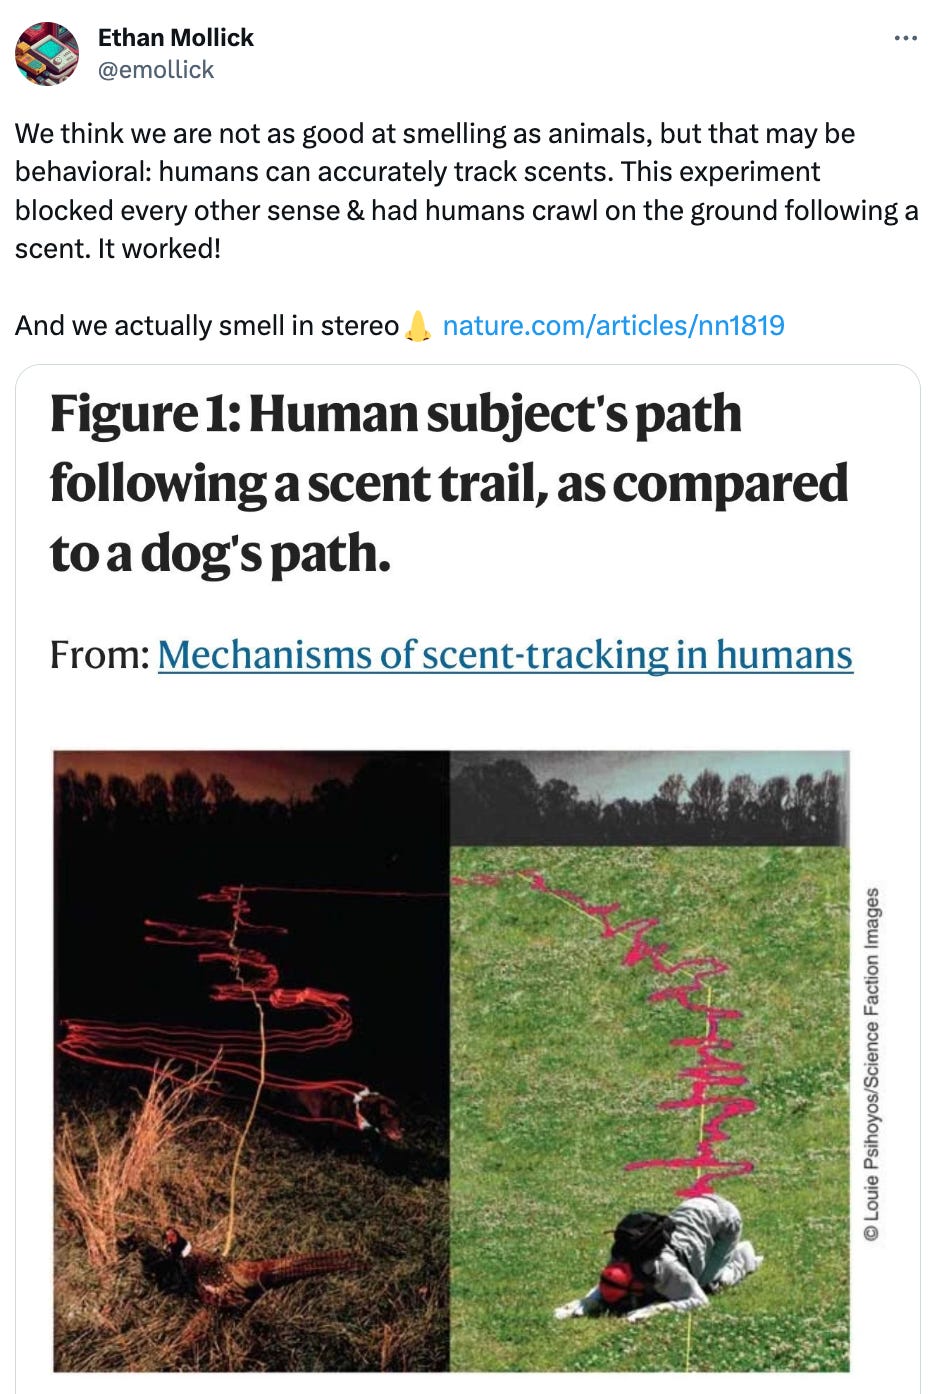  See new posts Conversation Ethan Mollick @emollick We think we are not as good at smelling as animals, but that may be behavioral: humans can accurately track scents. This experiment blocked every other sense & had humans crawl on the ground following a scent. It worked!  And we actually smell in stereo👃 https://nature.com/articles/nn1819